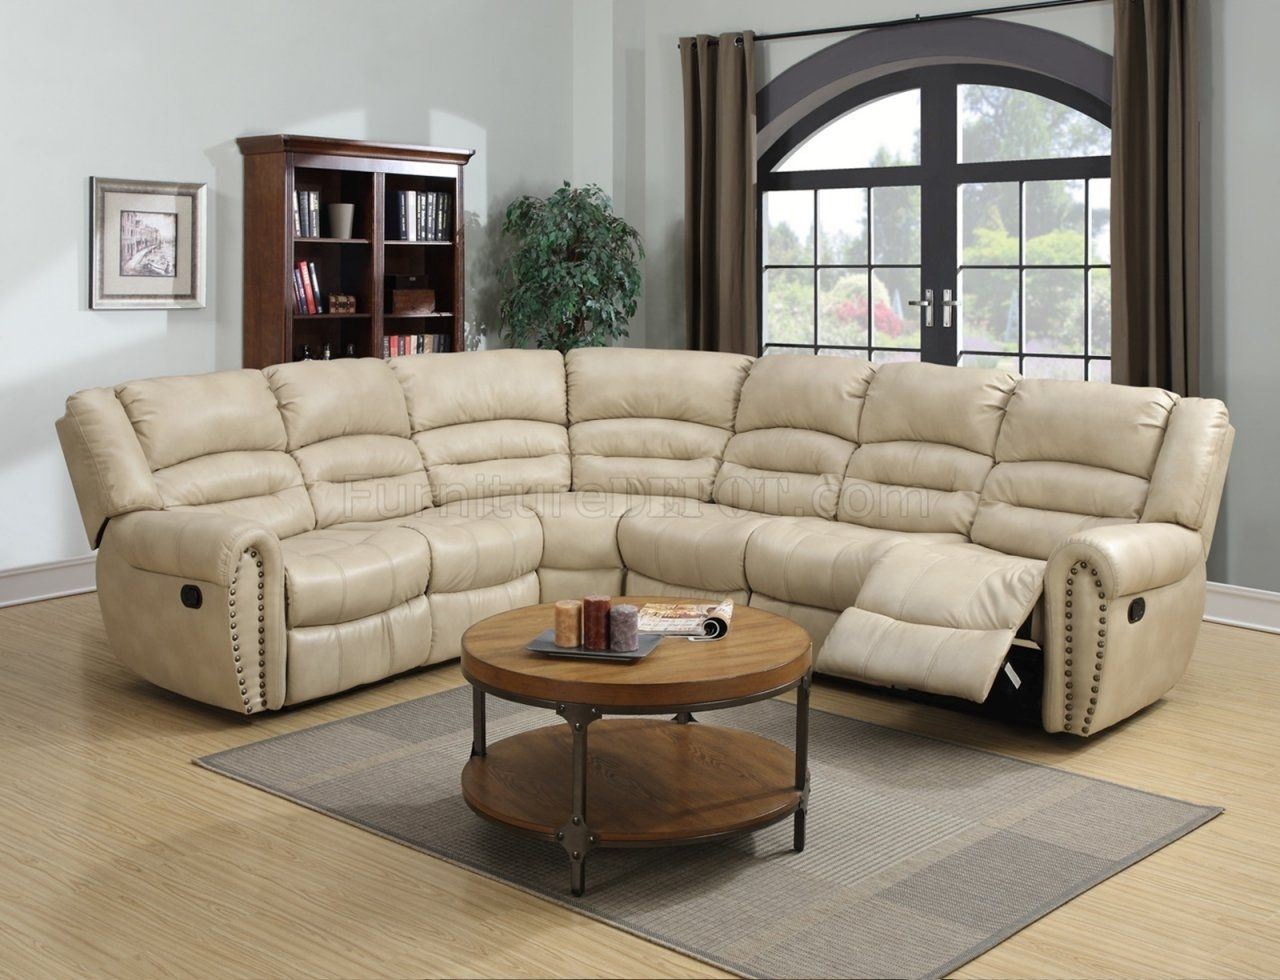 G687 Motion Sectional Sofa In Beige Bonded Leatherglory For Leather Motion Sectional Sofas (Photo 2 of 10)